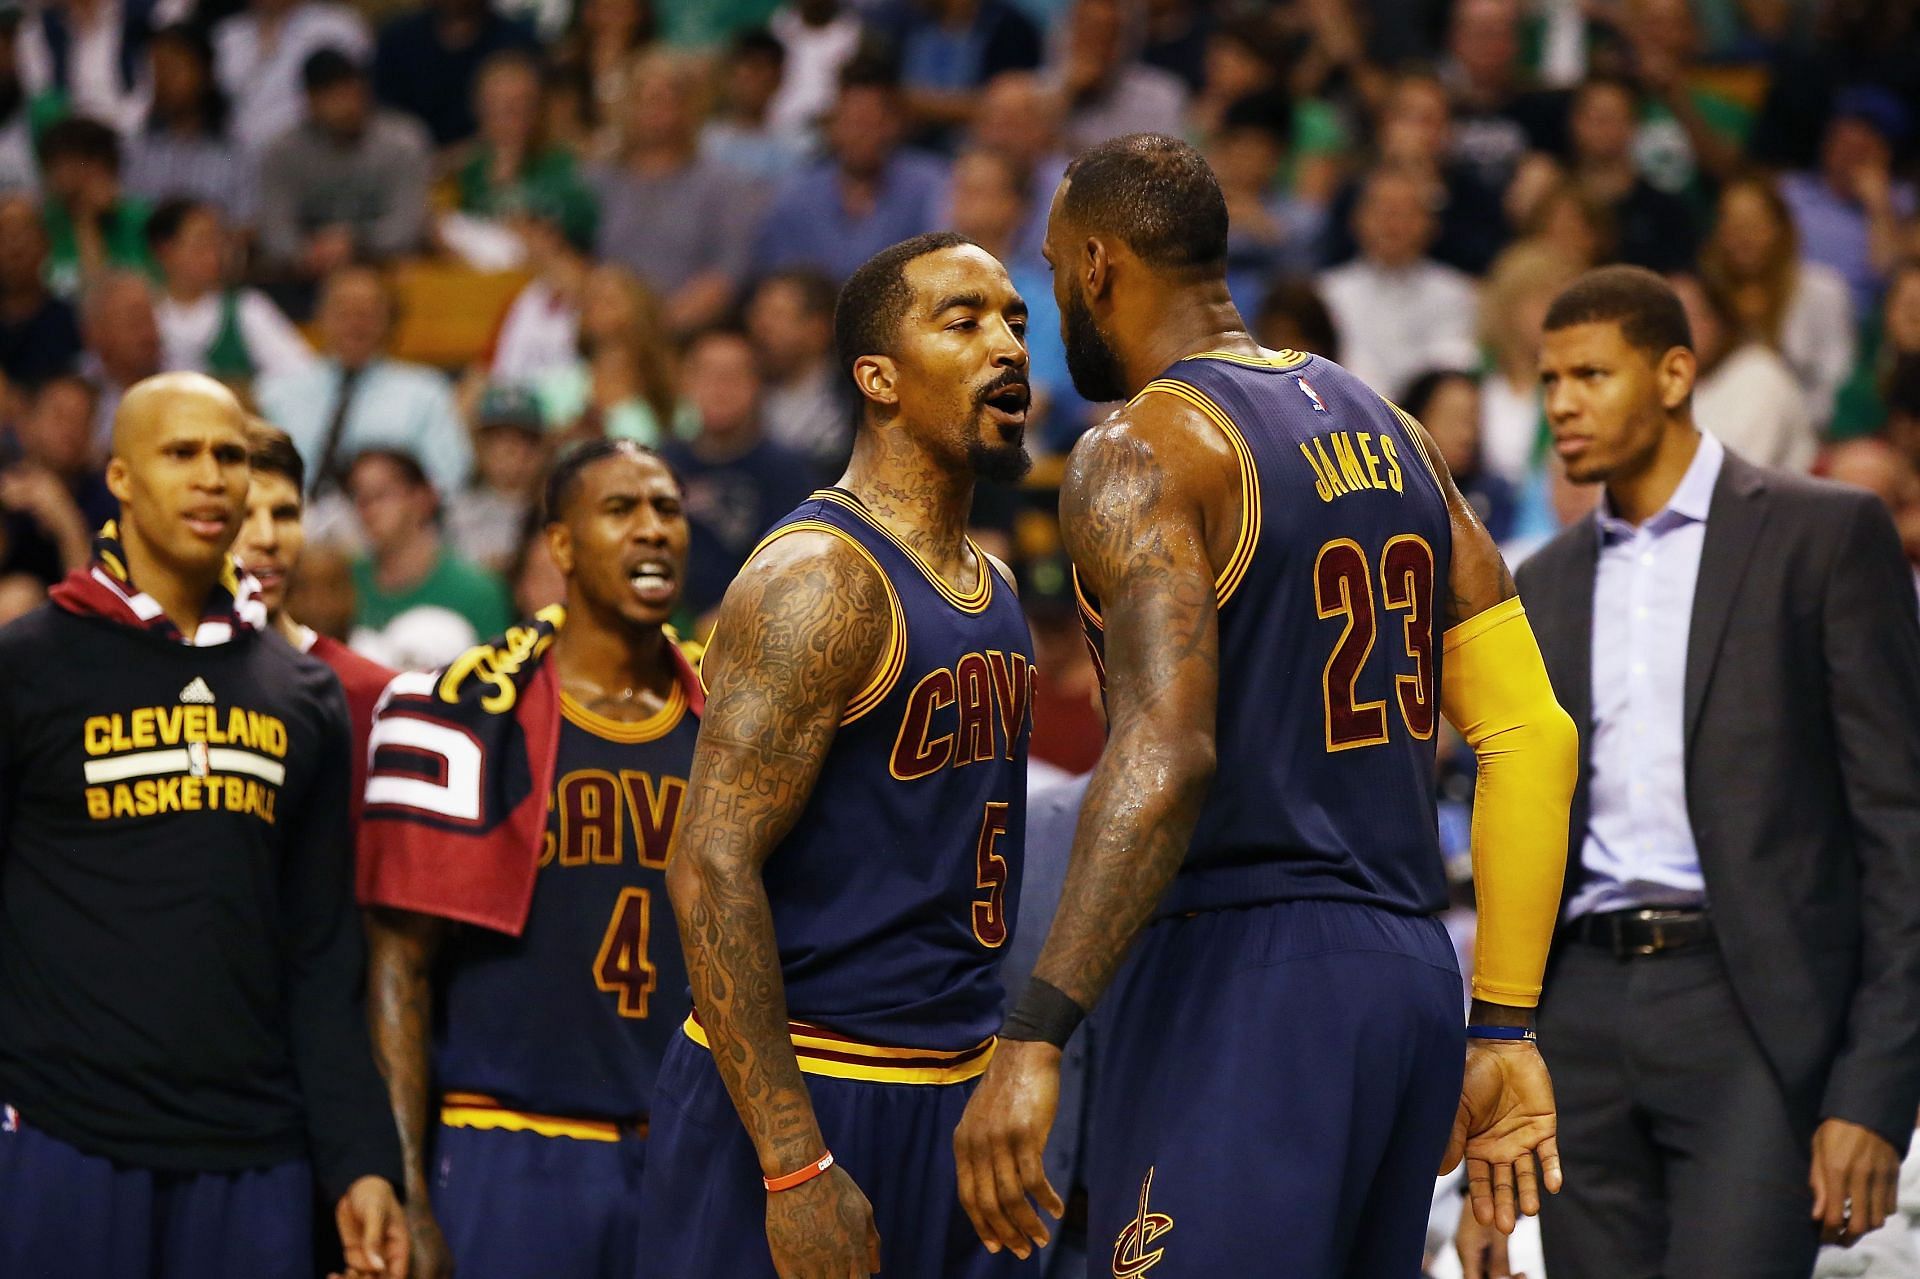 “I’m not about to just go right up on this tall-a** motherf**ker” - J.R. Smith on his infamous dribble incident in the 2018 NBA Finals, says he thought will call a timeout